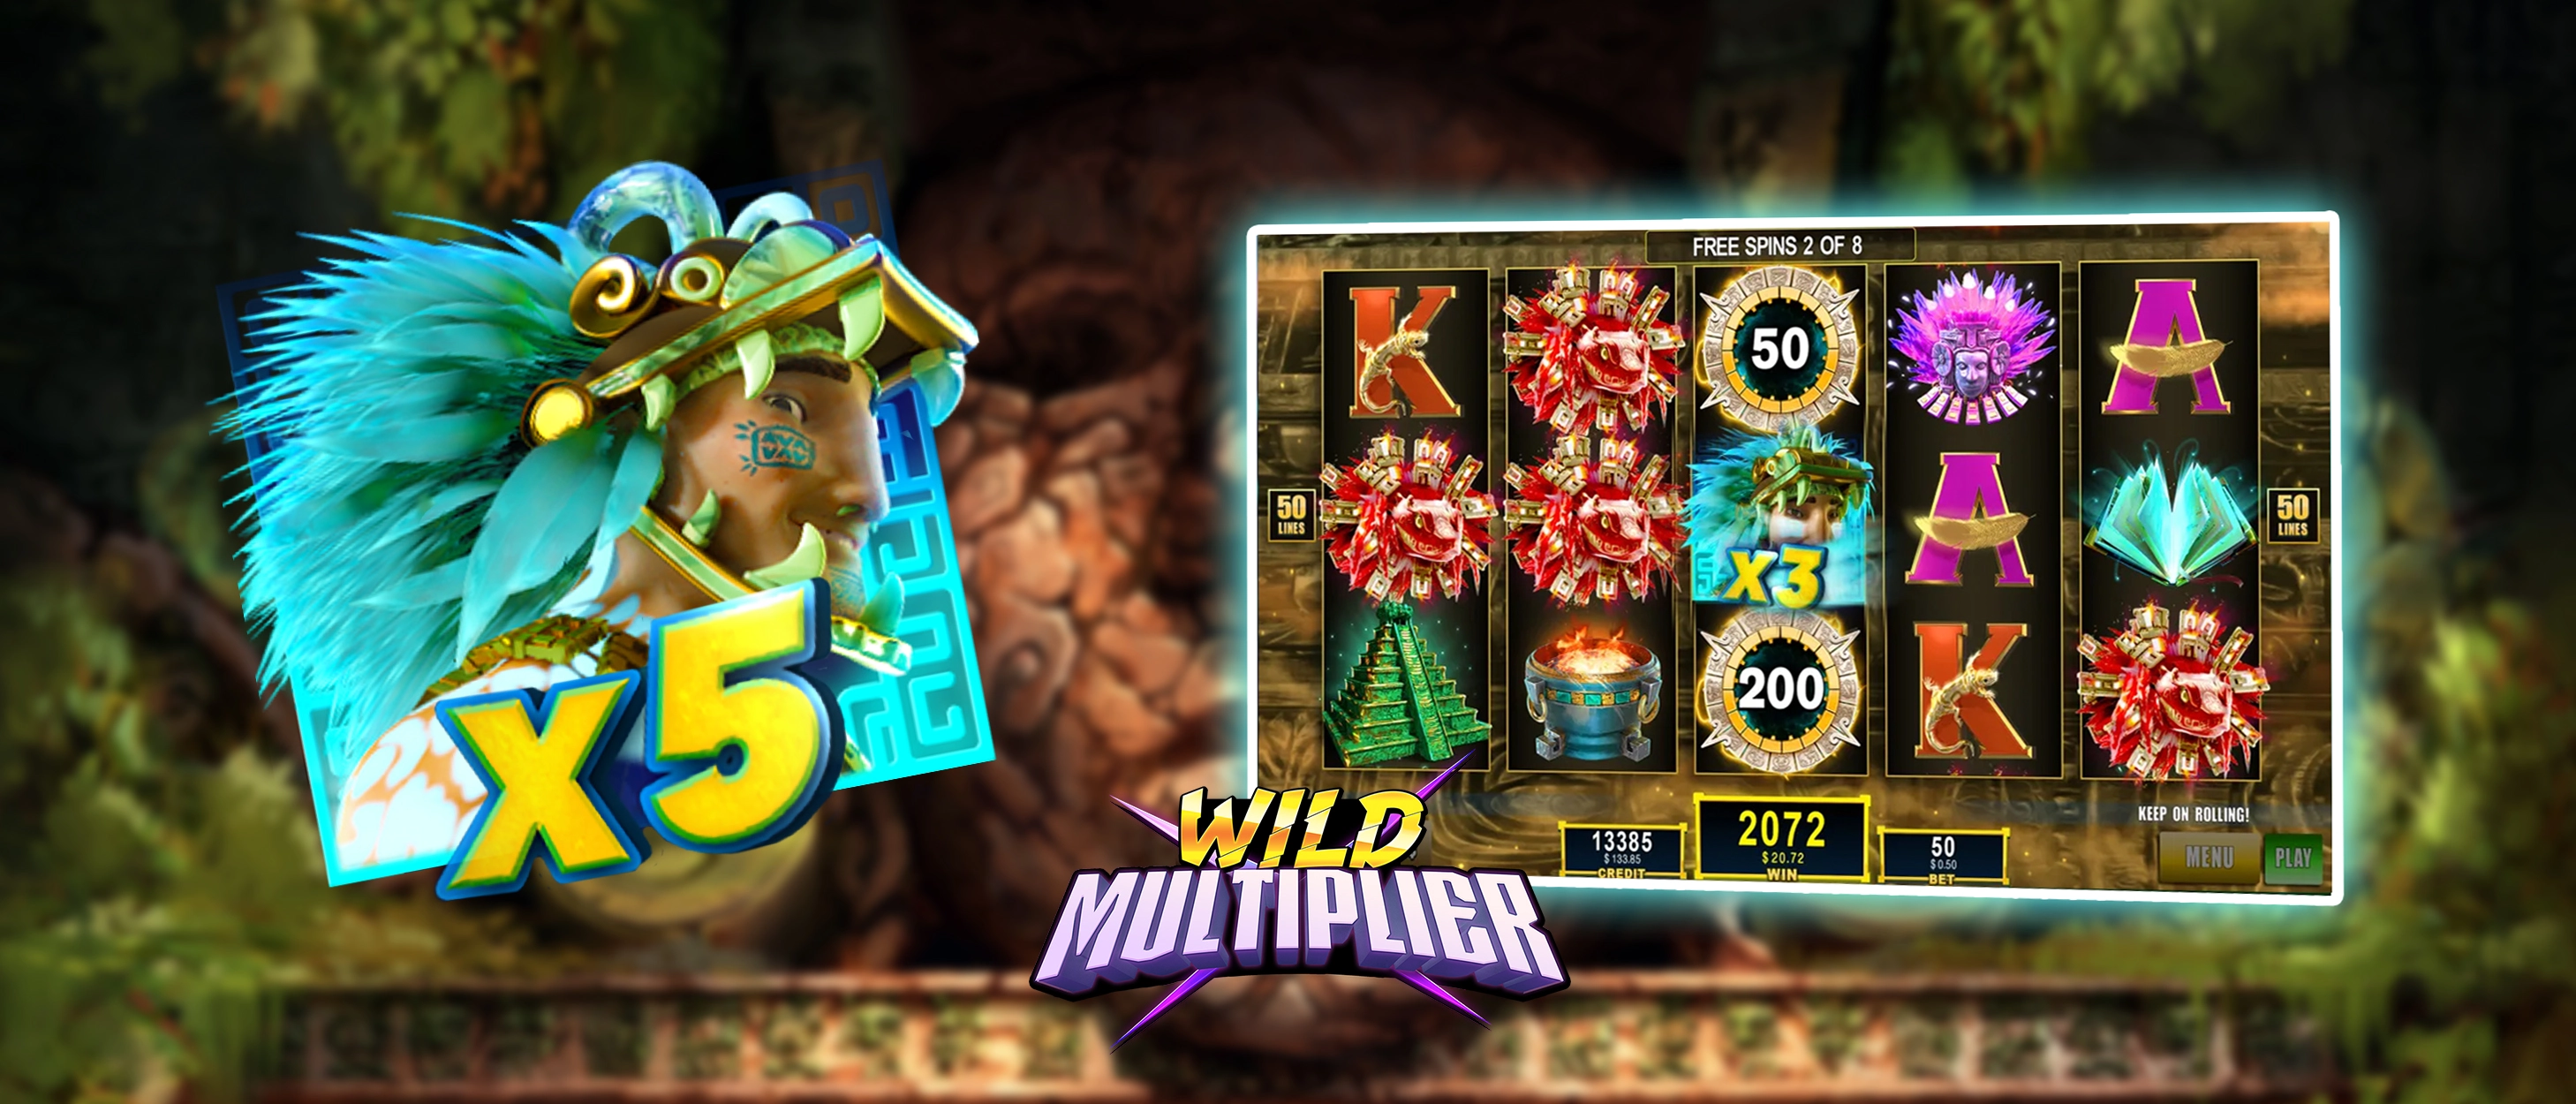 This image includes a symbol of the Wild Multiplier game feature and one example of a game screen with this casino slots feature applied in the Eternal Kingdom slots game.